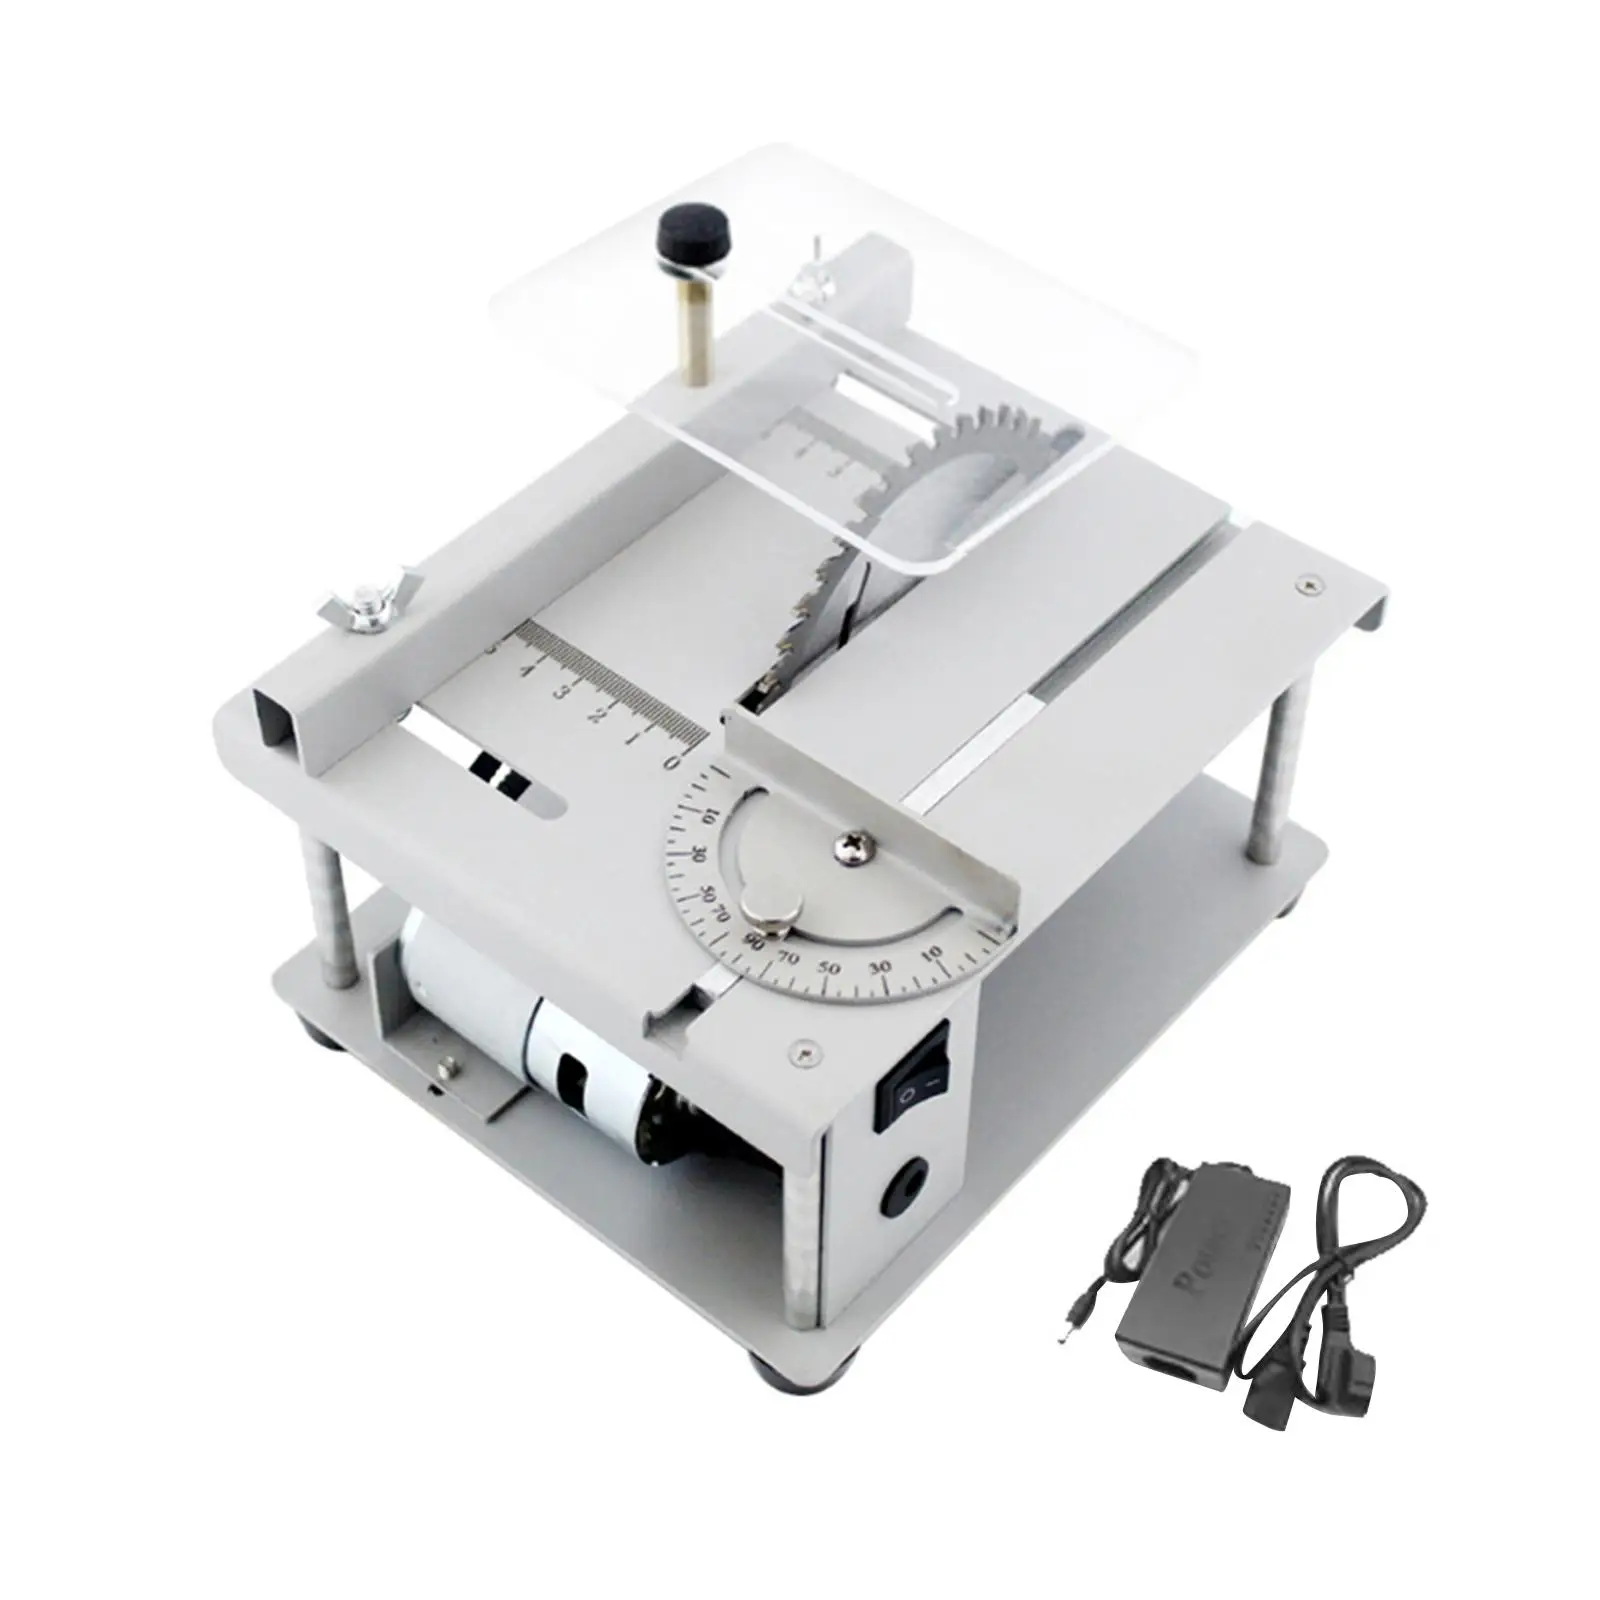 Mini Table Saw DIY Wood Acrylic Handmade Model Cutter Machine Woodworking Bench Saw for Wood Crafts Miniatures Metal Aluminum